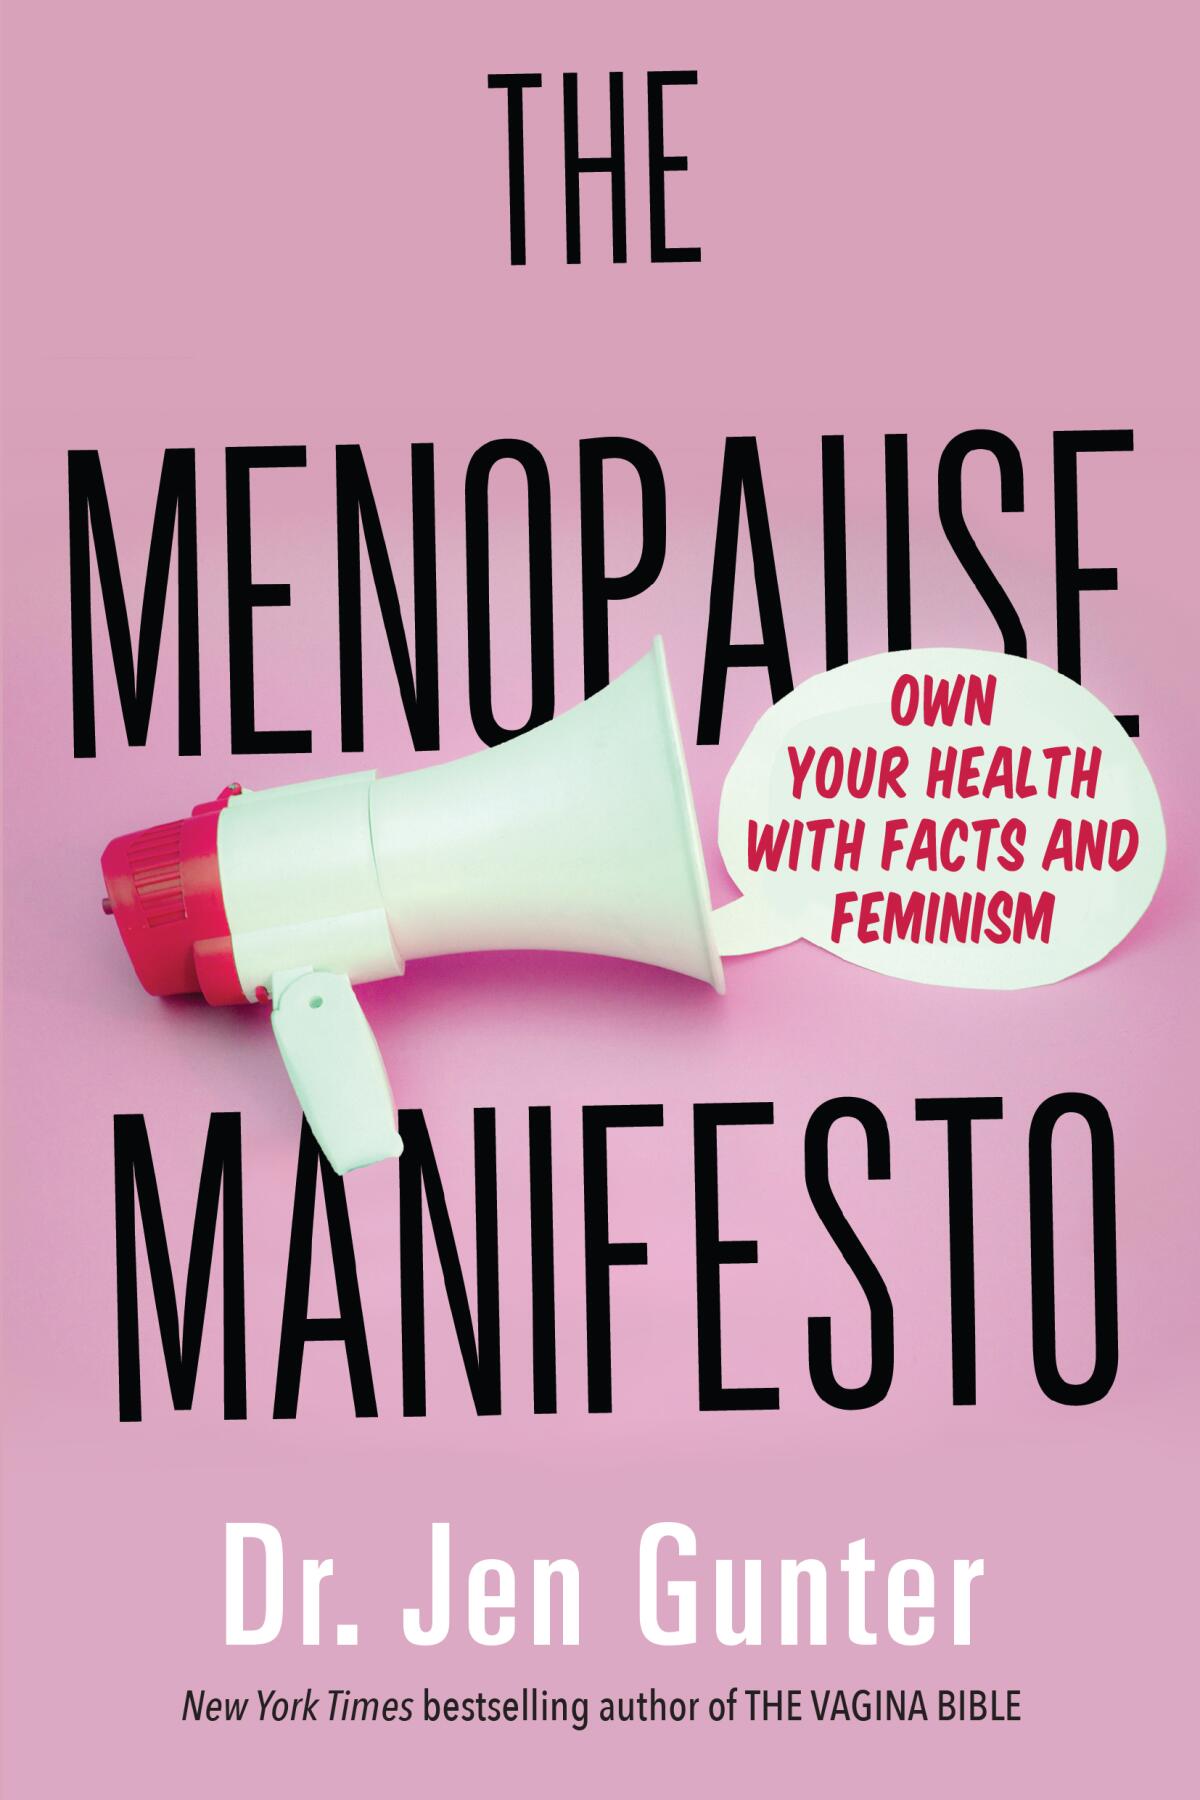 Book cover for "The Menopause Manifesto" 